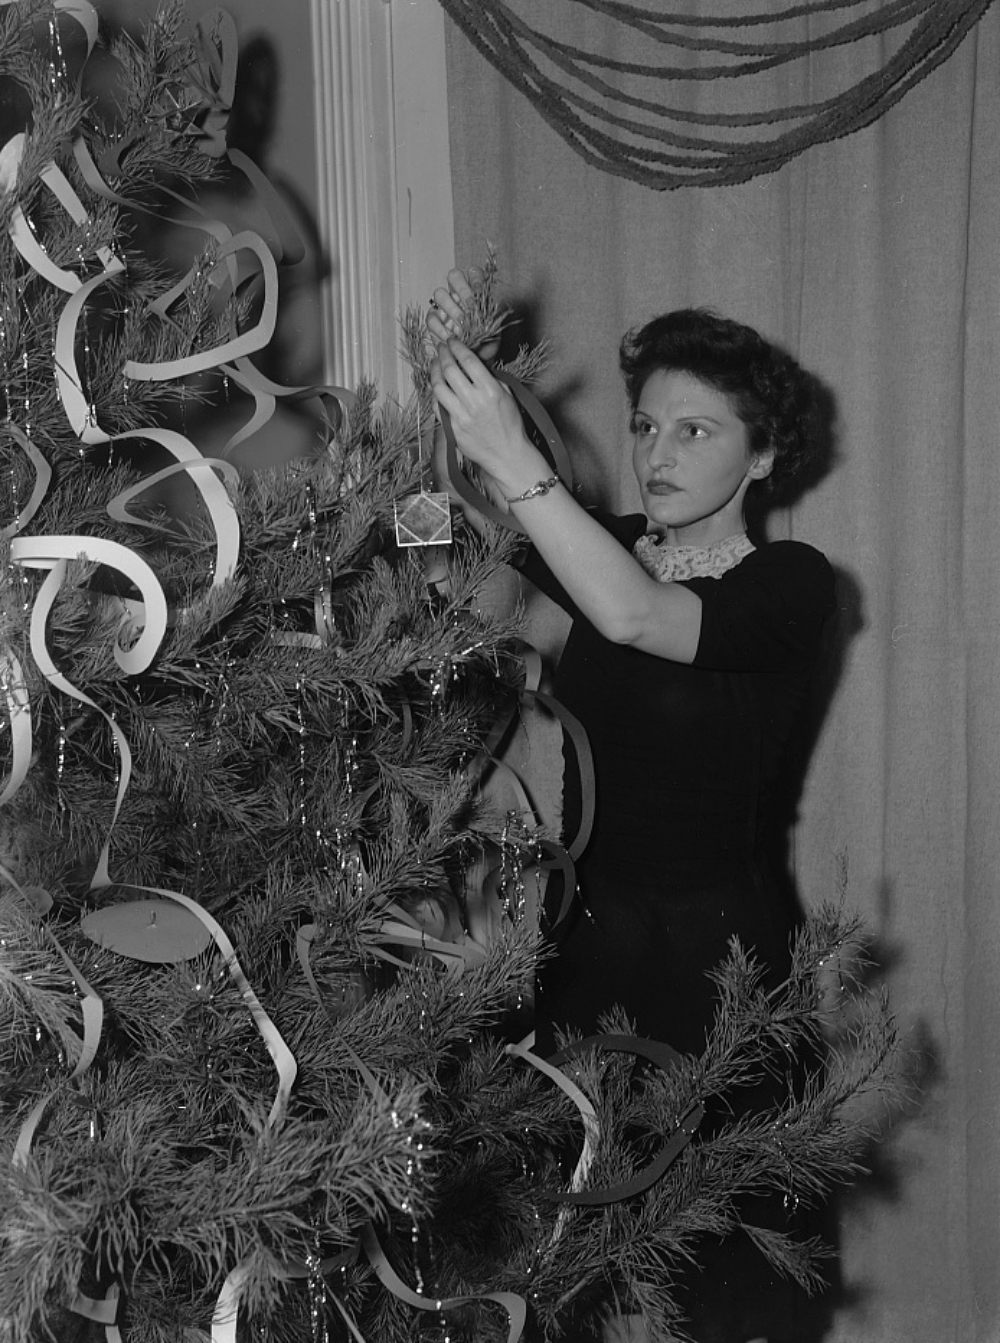 woman decorating a Christmas tree with homemade items 1943